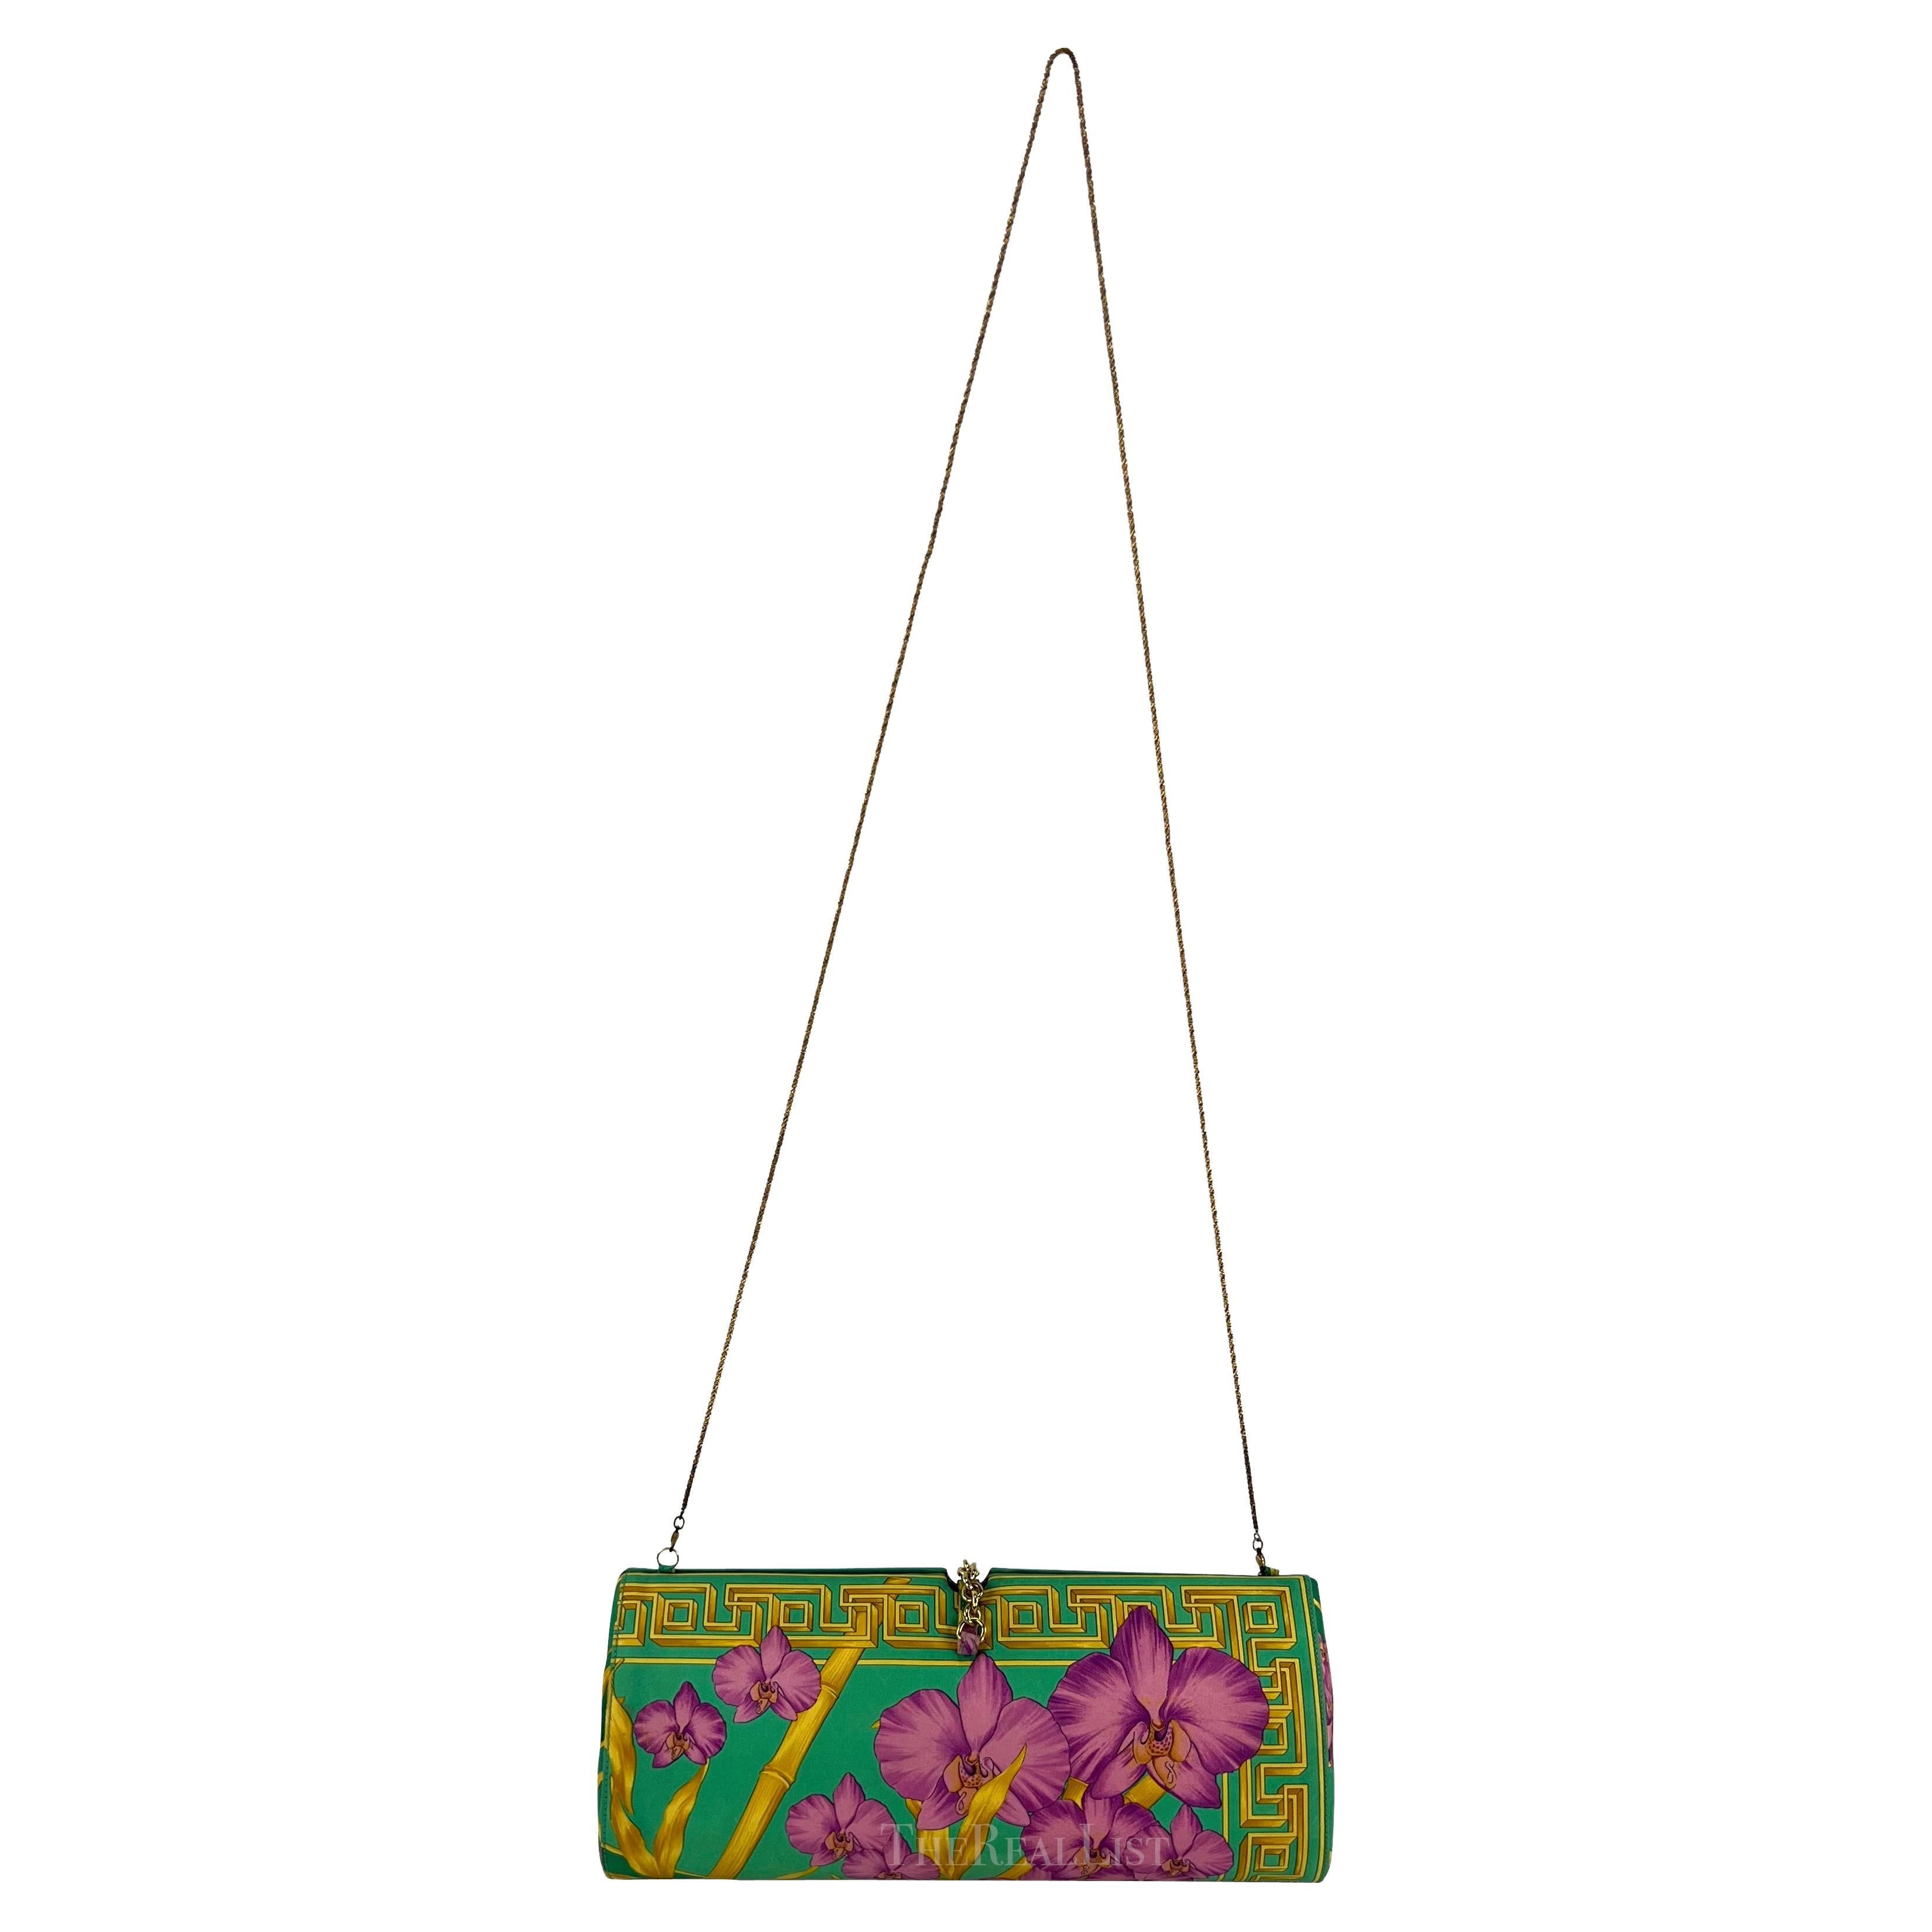 S/S 2000 Gianni Versace by Donatella Green Floral Convertible Runway Clutch For Sale 5